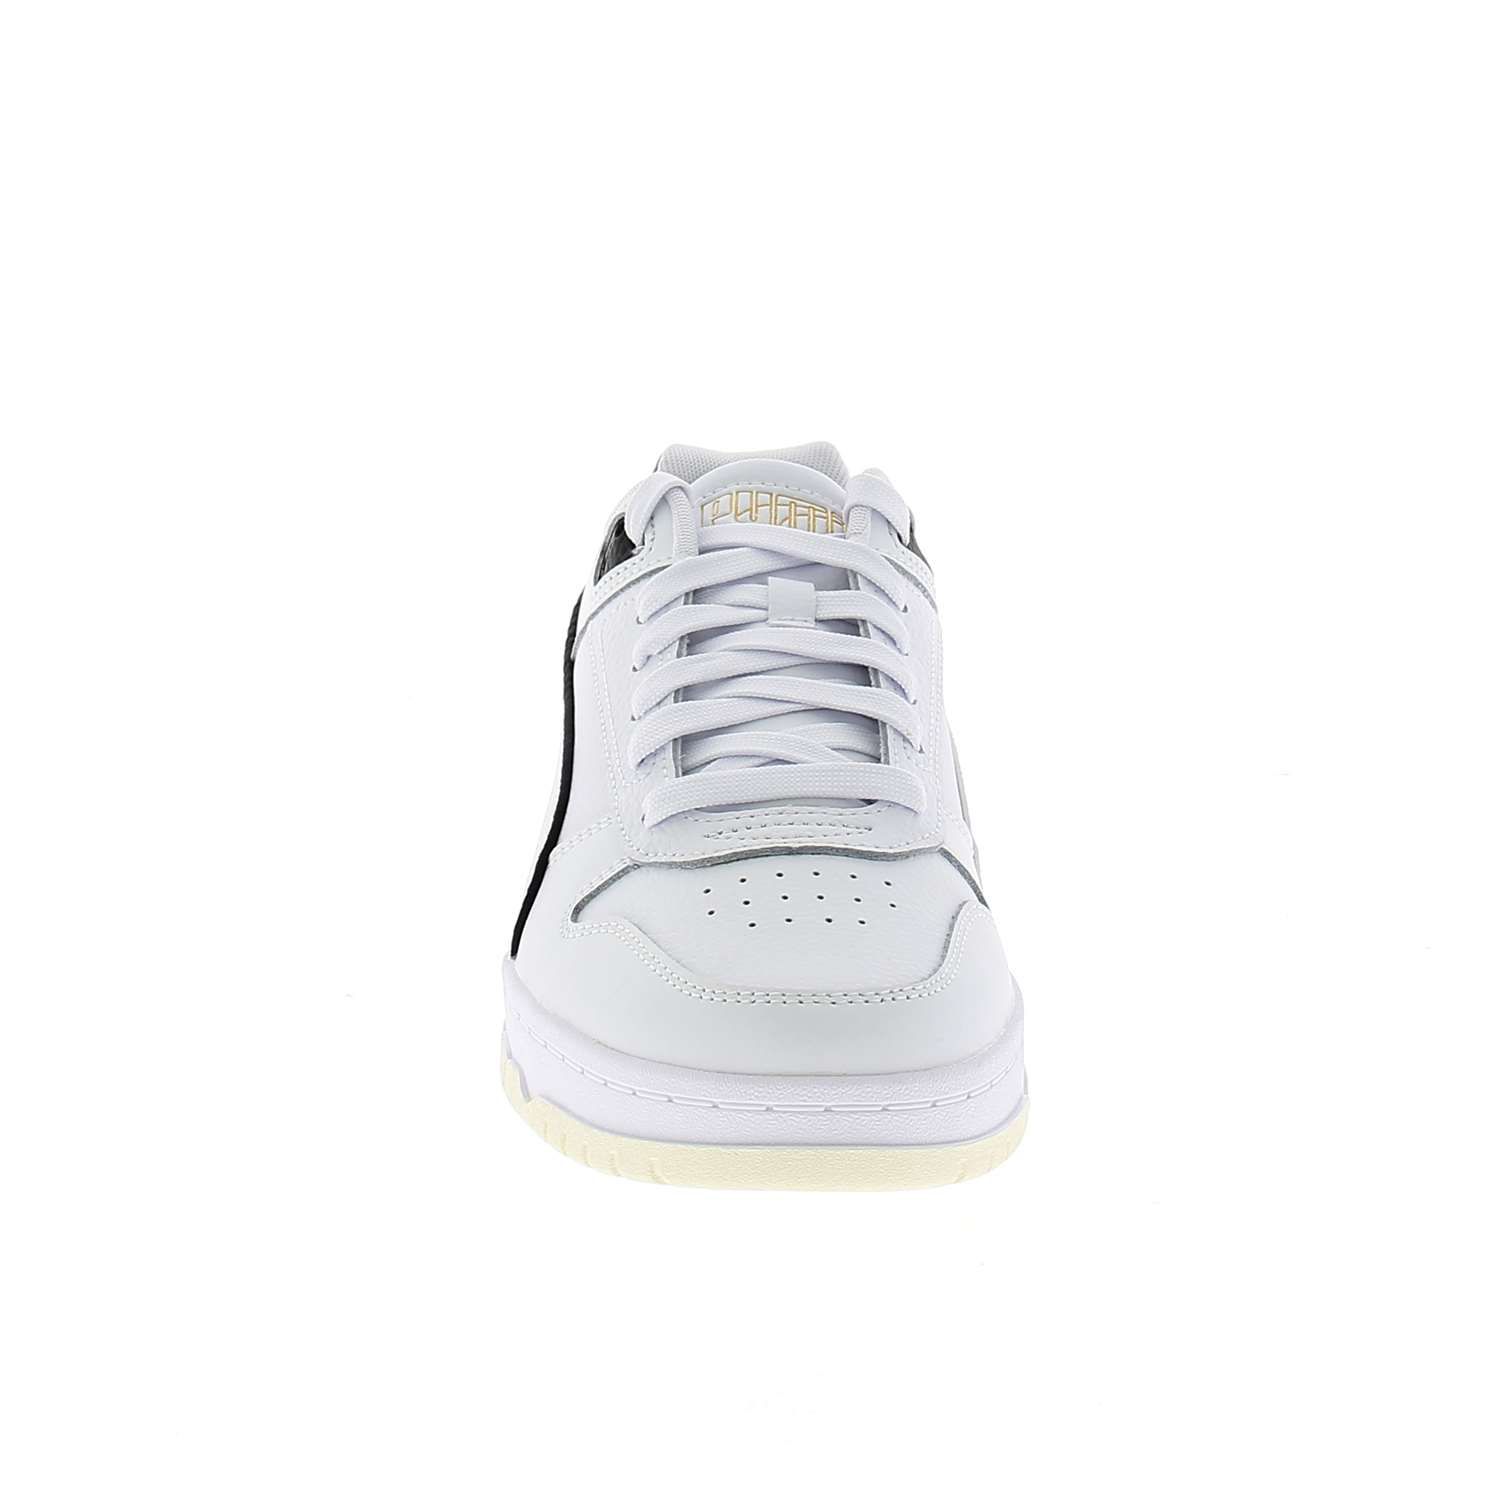 03 - RBD GAME LOW - PUMA - Baskets - Synthétique